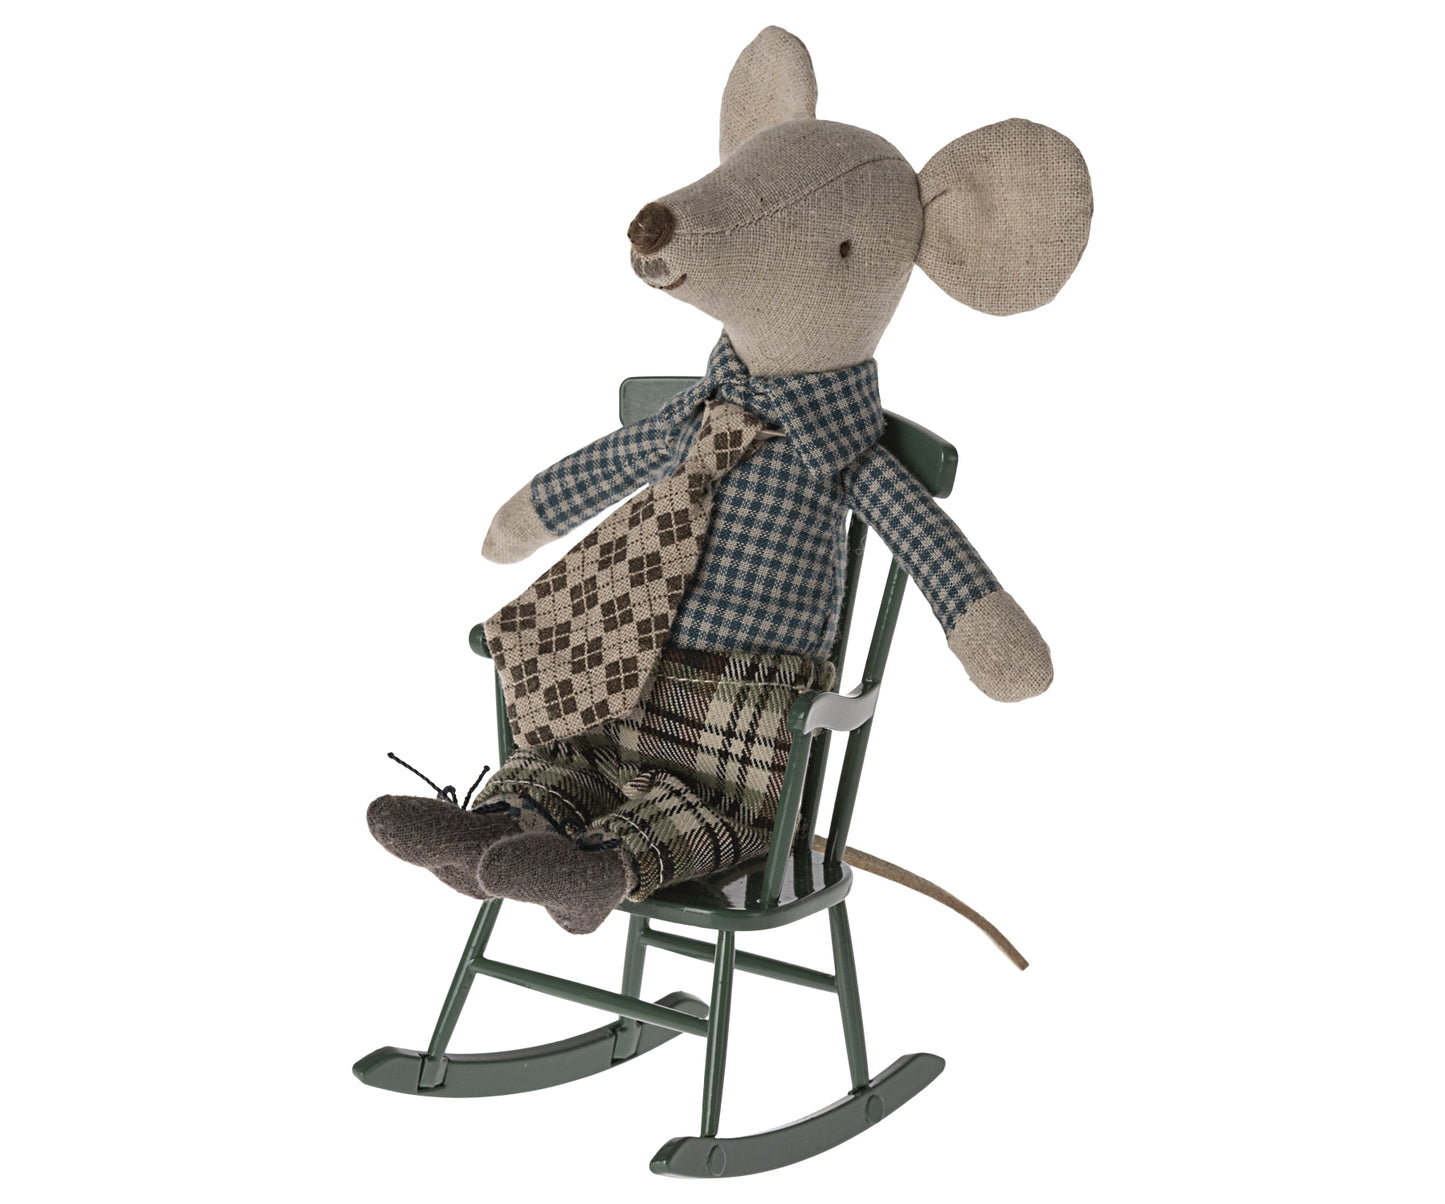 *PRE-ORDER* - Maileg Maileg Rocking Chair, Mouse, Dark Green - *ESTIMATED ARRIVAL MID APRIL 2024*